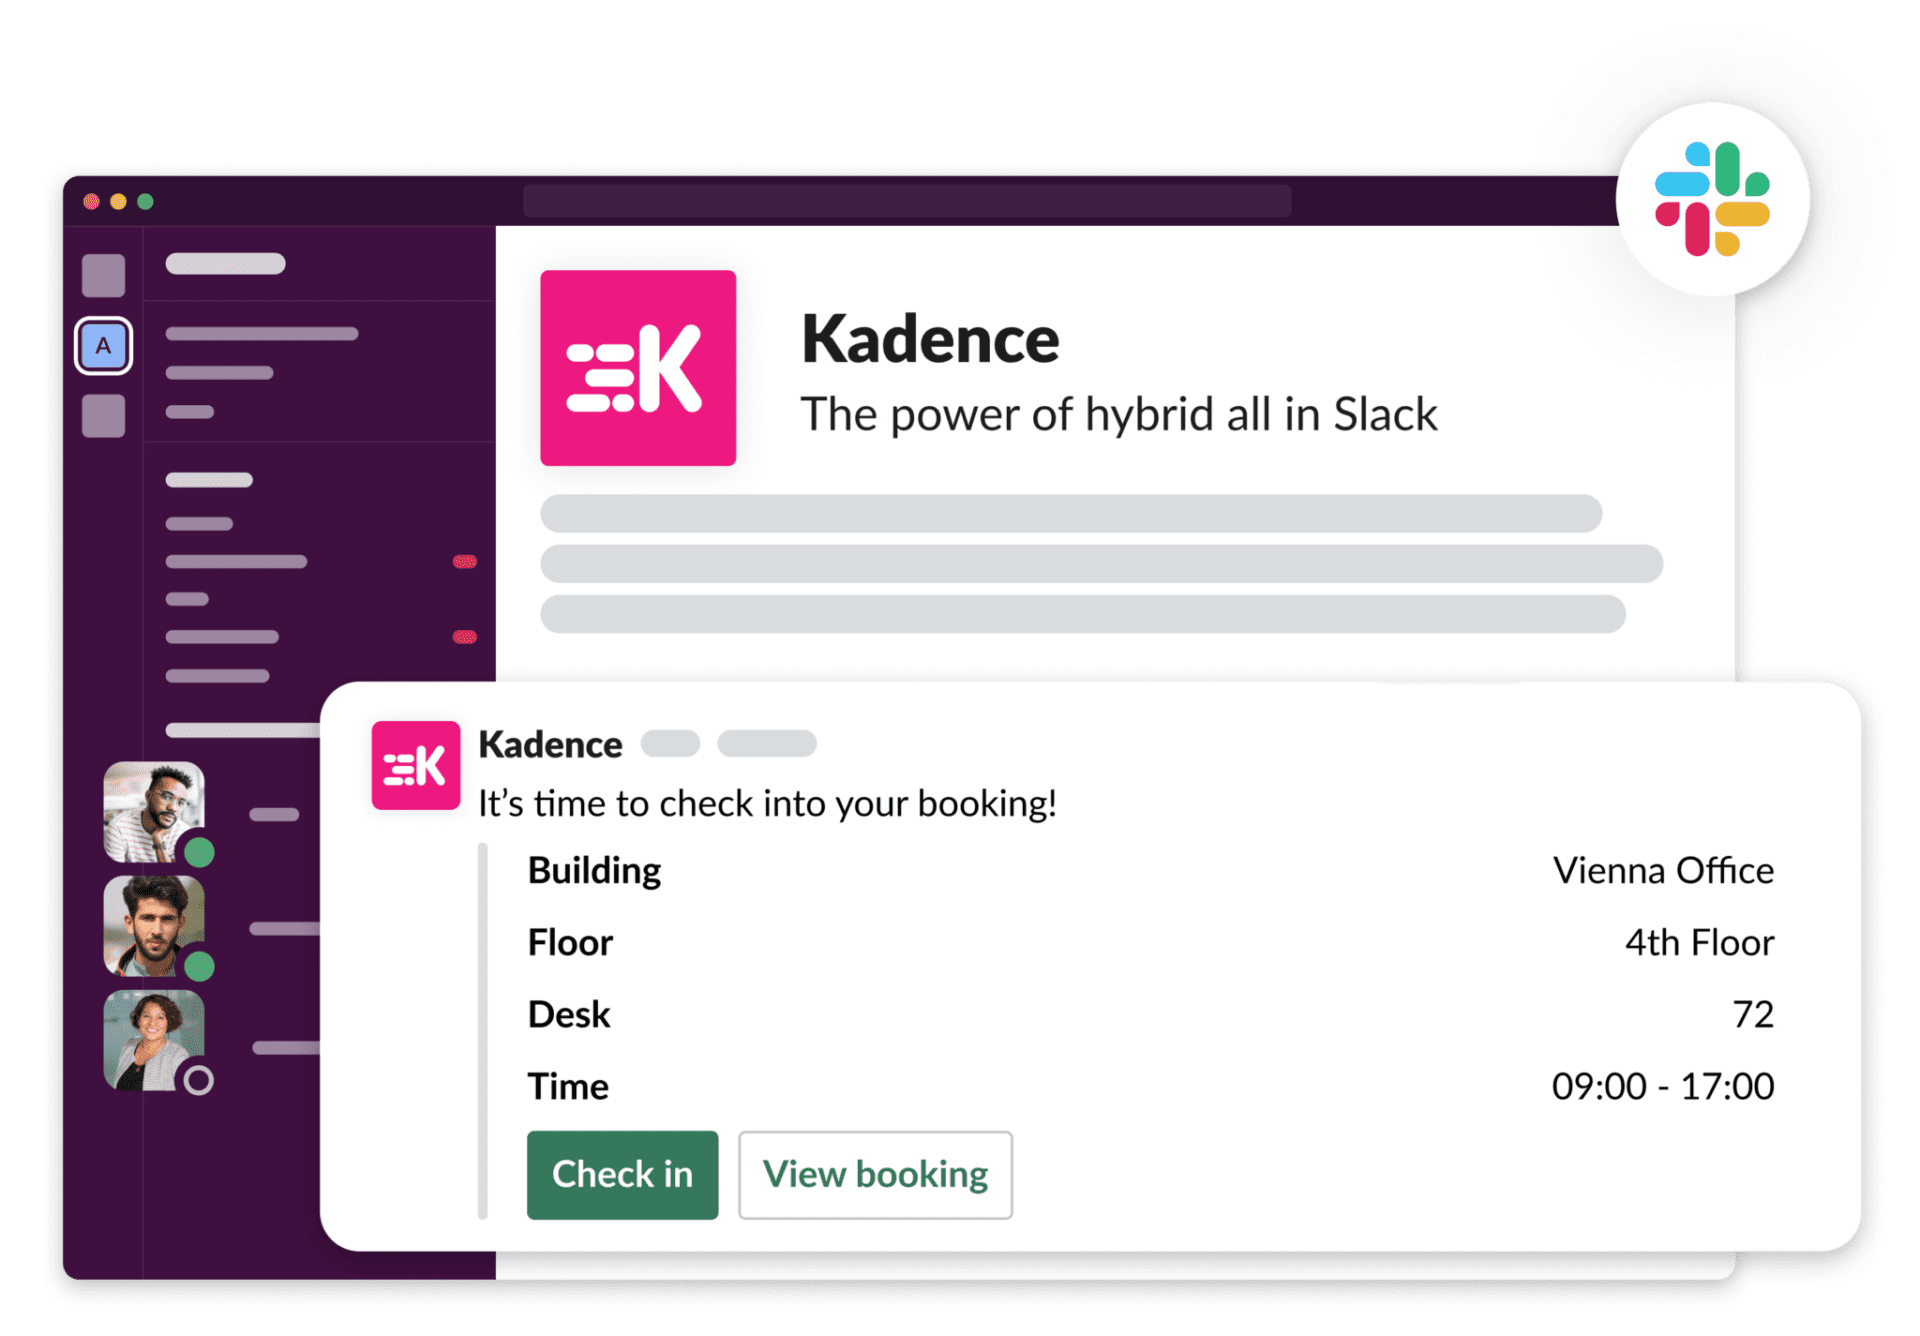 Slack desk booking integration notifies you to check in and view your booking